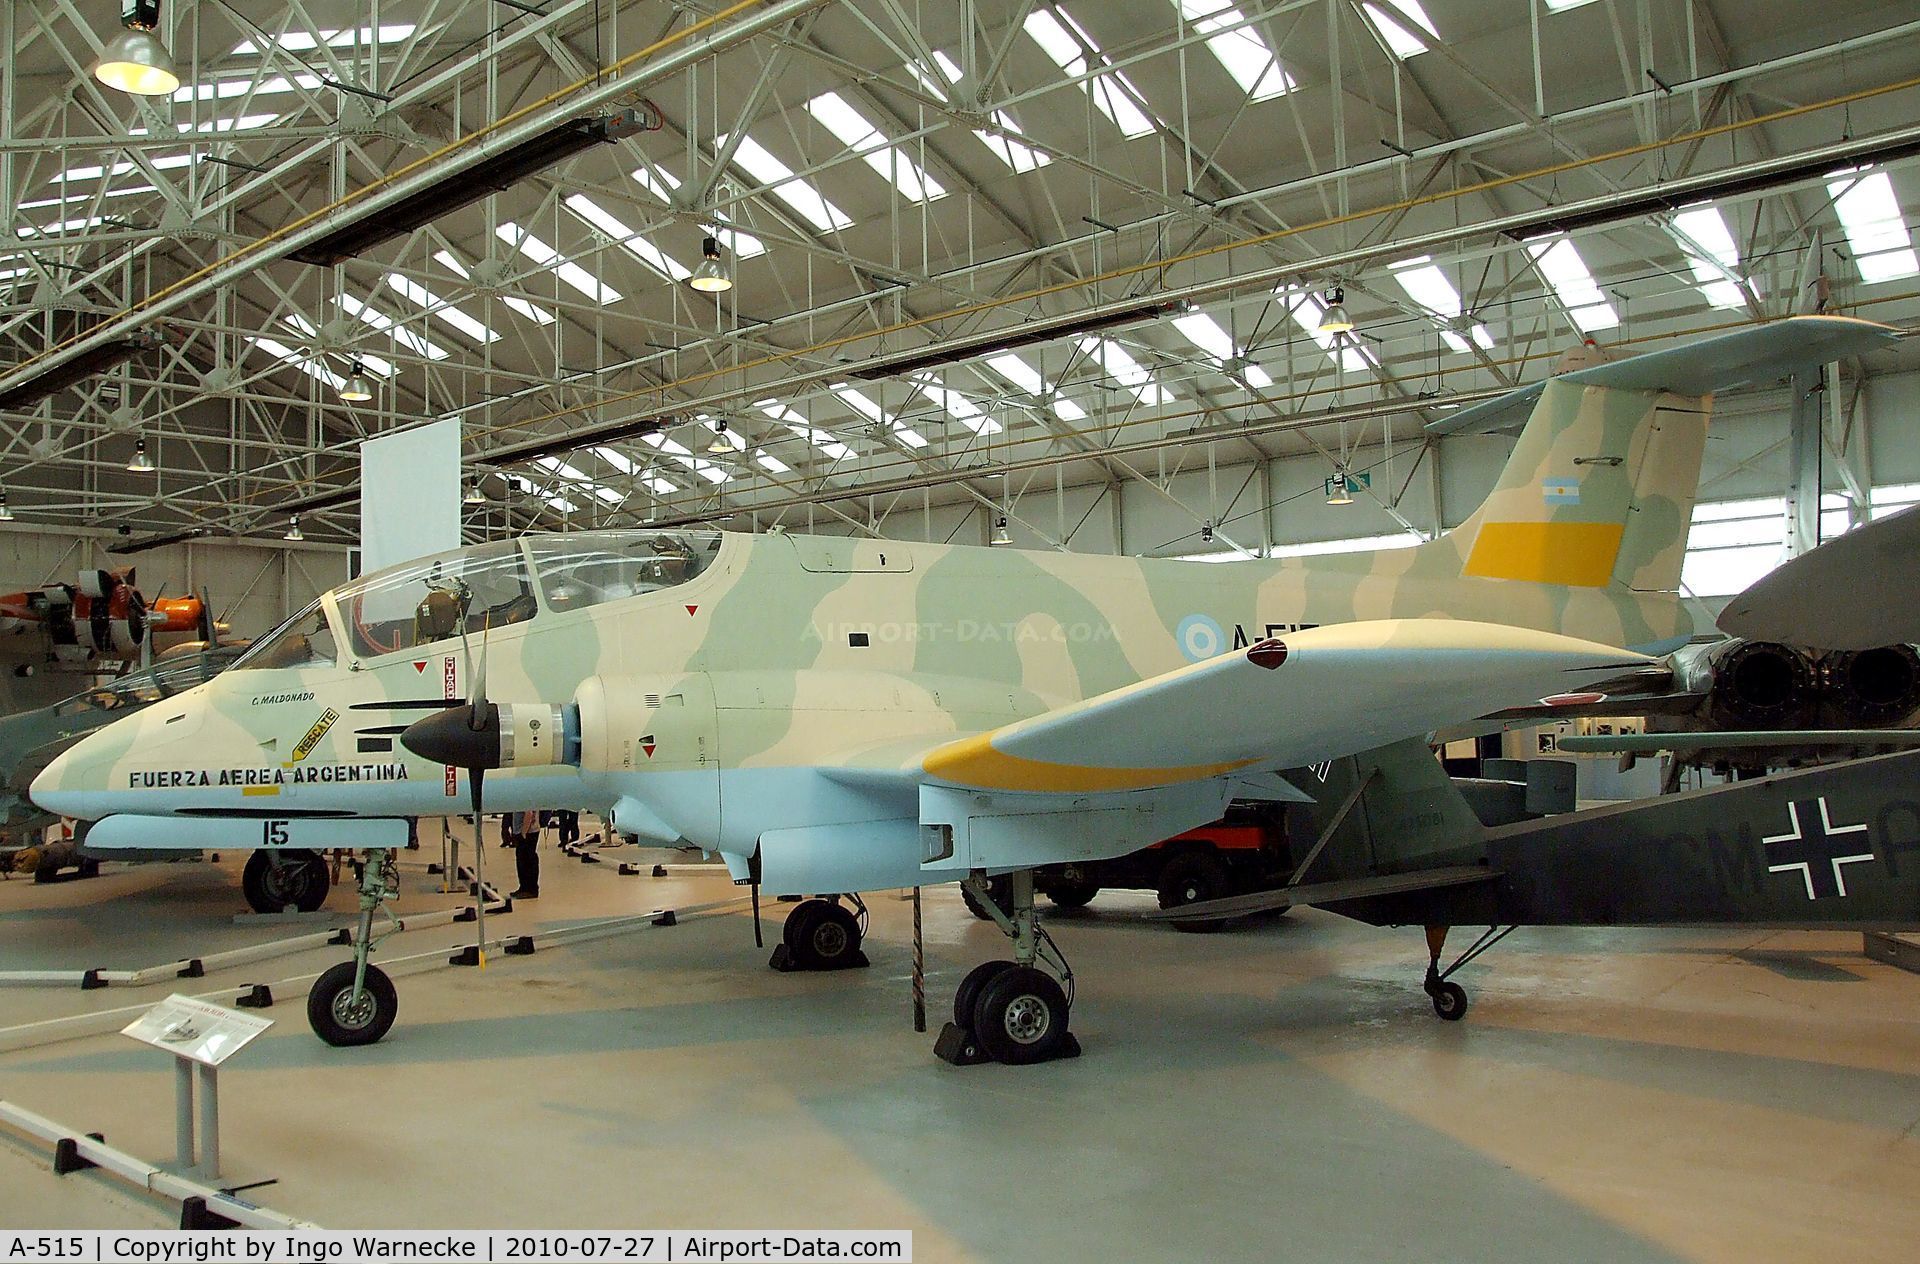 A-515, FMA IA-58A Pucará C/N 018, FMA IA-58A Pucara at the RAF Museum, Cosford